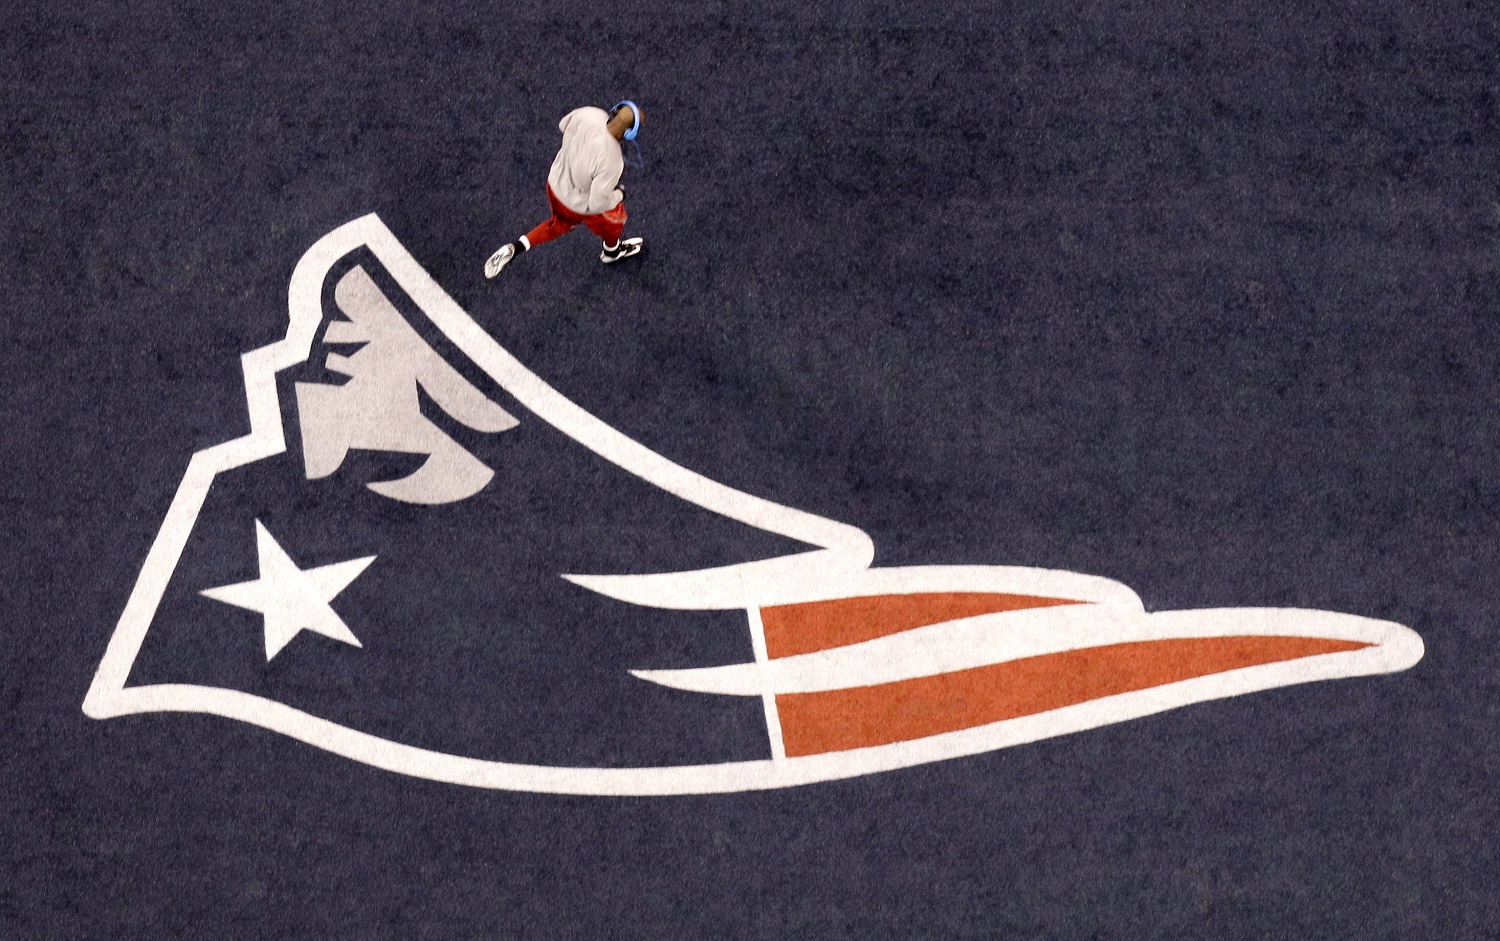 A New England Patriots logo is seen before the NFL Super Bowl XLVI football game between the New York Giants and the New England Patriots Sunday, Feb. 5, 2012, in Indianapolis. (AP Photo/David J. Phillip)